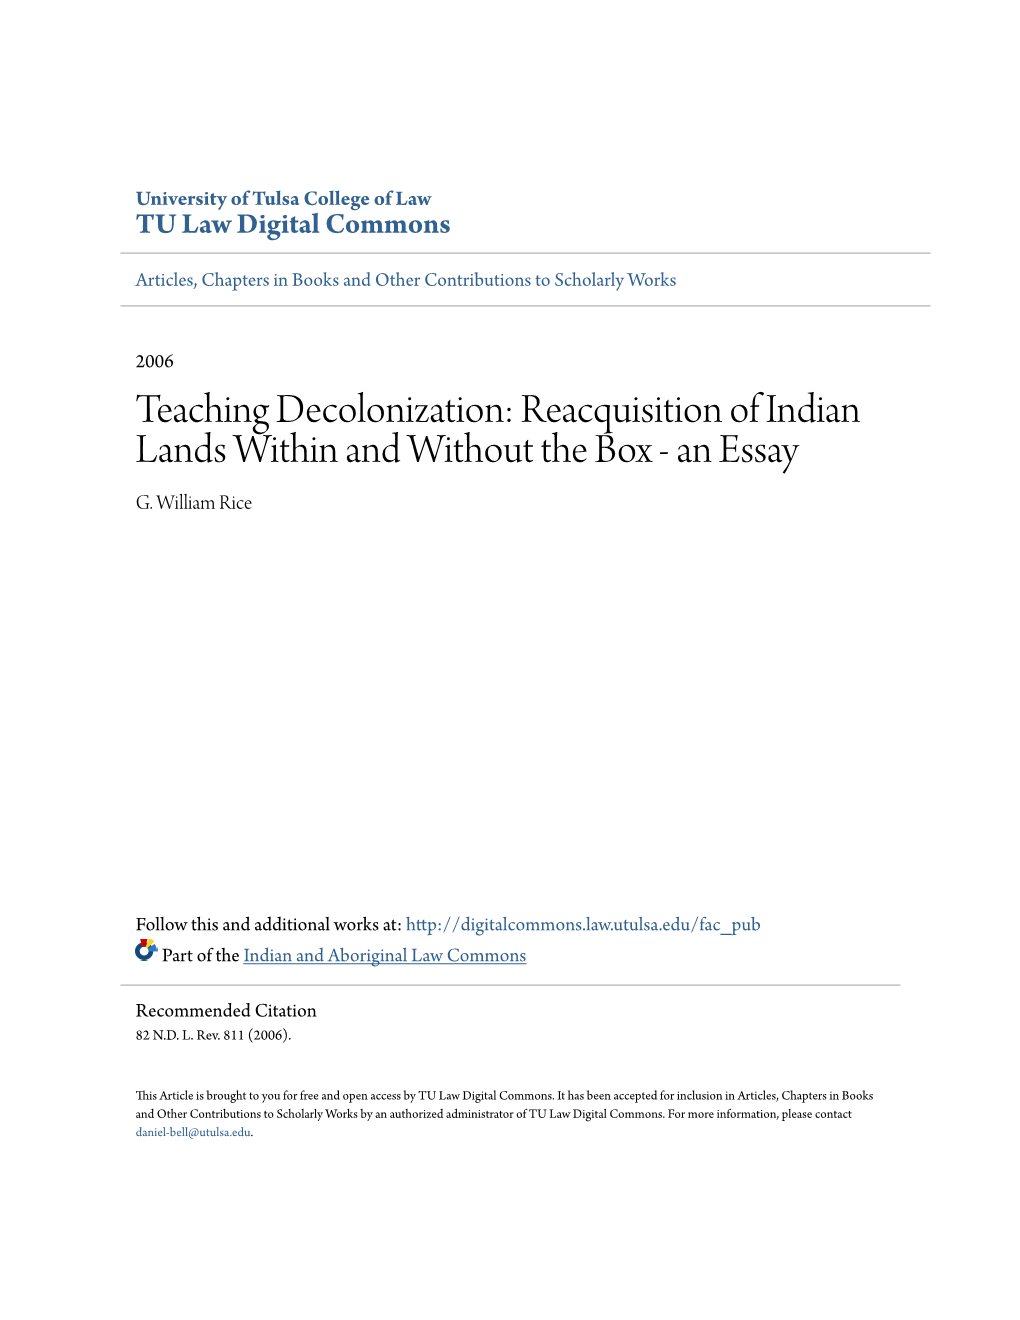 Teaching Decolonization: Reacquisition of Indian Lands Within and Without the Box - an Essay G